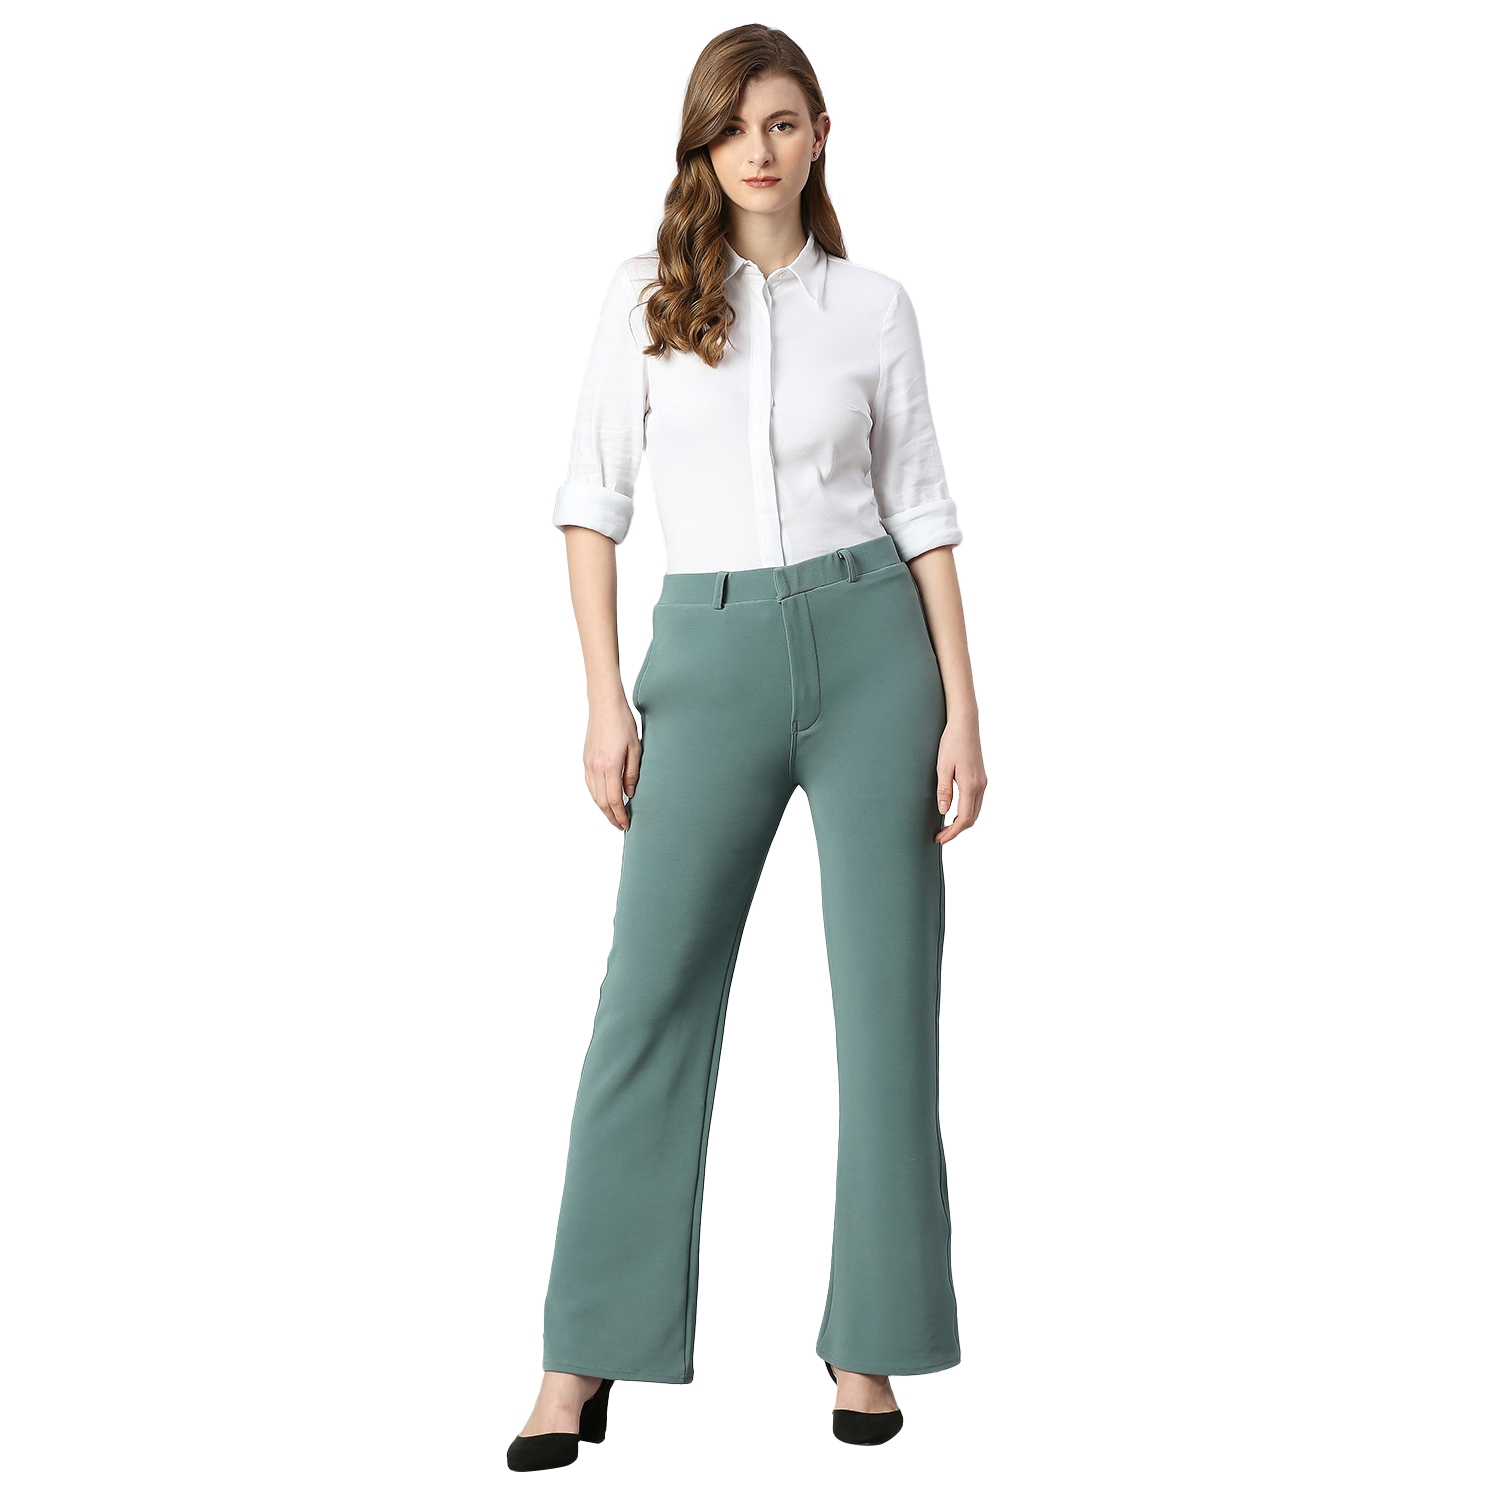 Cotton Lycra Mint Trouser For Women's.Ladies Casual Trouser,Track Pant,Girls  stylish Trouser Pant.Elastic Staright Pants, for Casual Office Work  wear.Slim Fit Formal Trousers/Pant.formal Trouser For Womens.Womens Trousers  Cotton Pant.Formal Tousers For